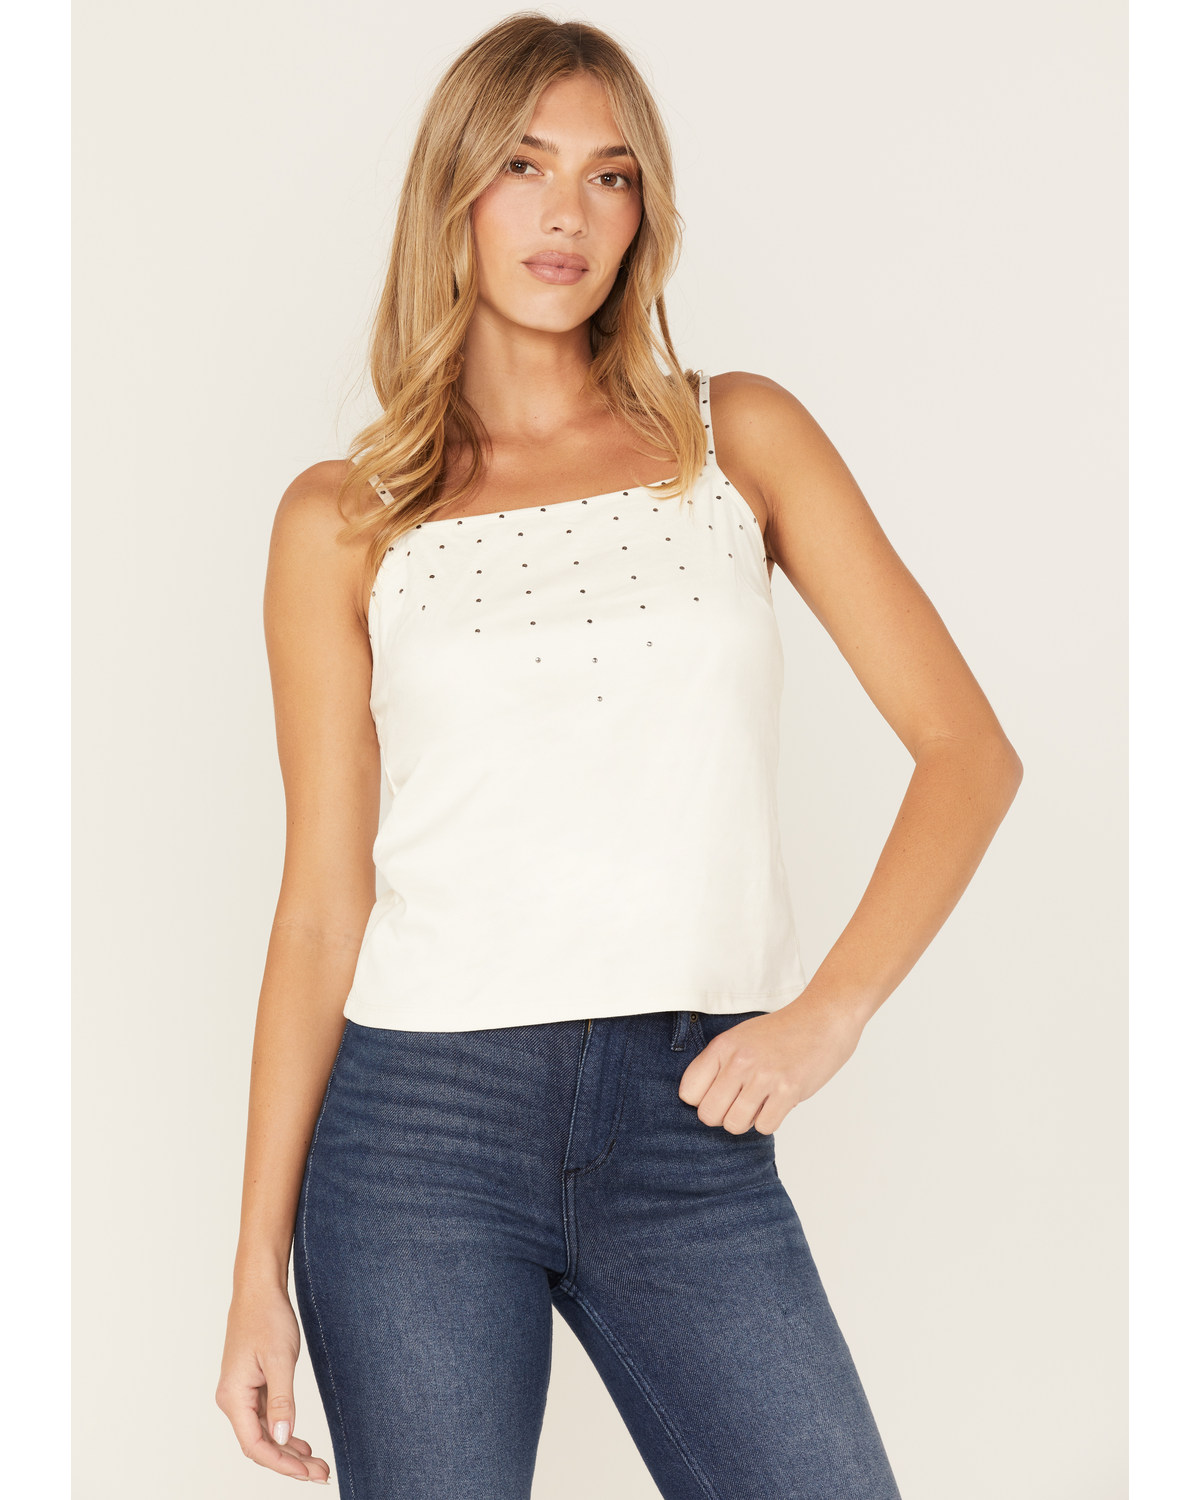 Idyllwind Women's Studded Faux Suede Date Night Top